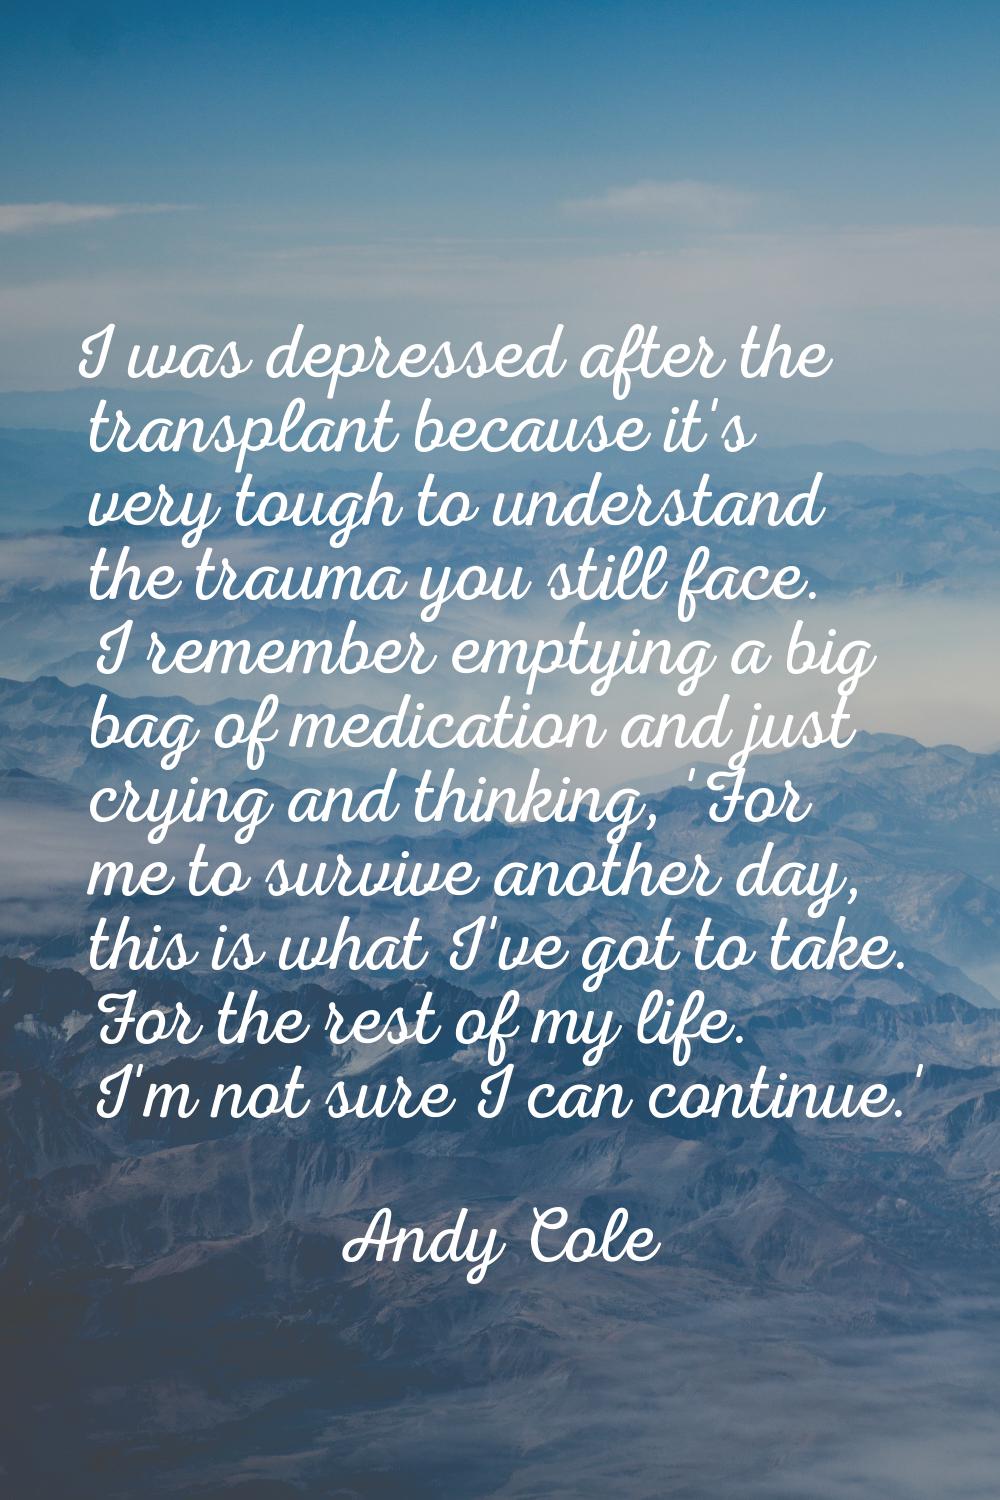 I was depressed after the transplant because it's very tough to understand the trauma you still fac